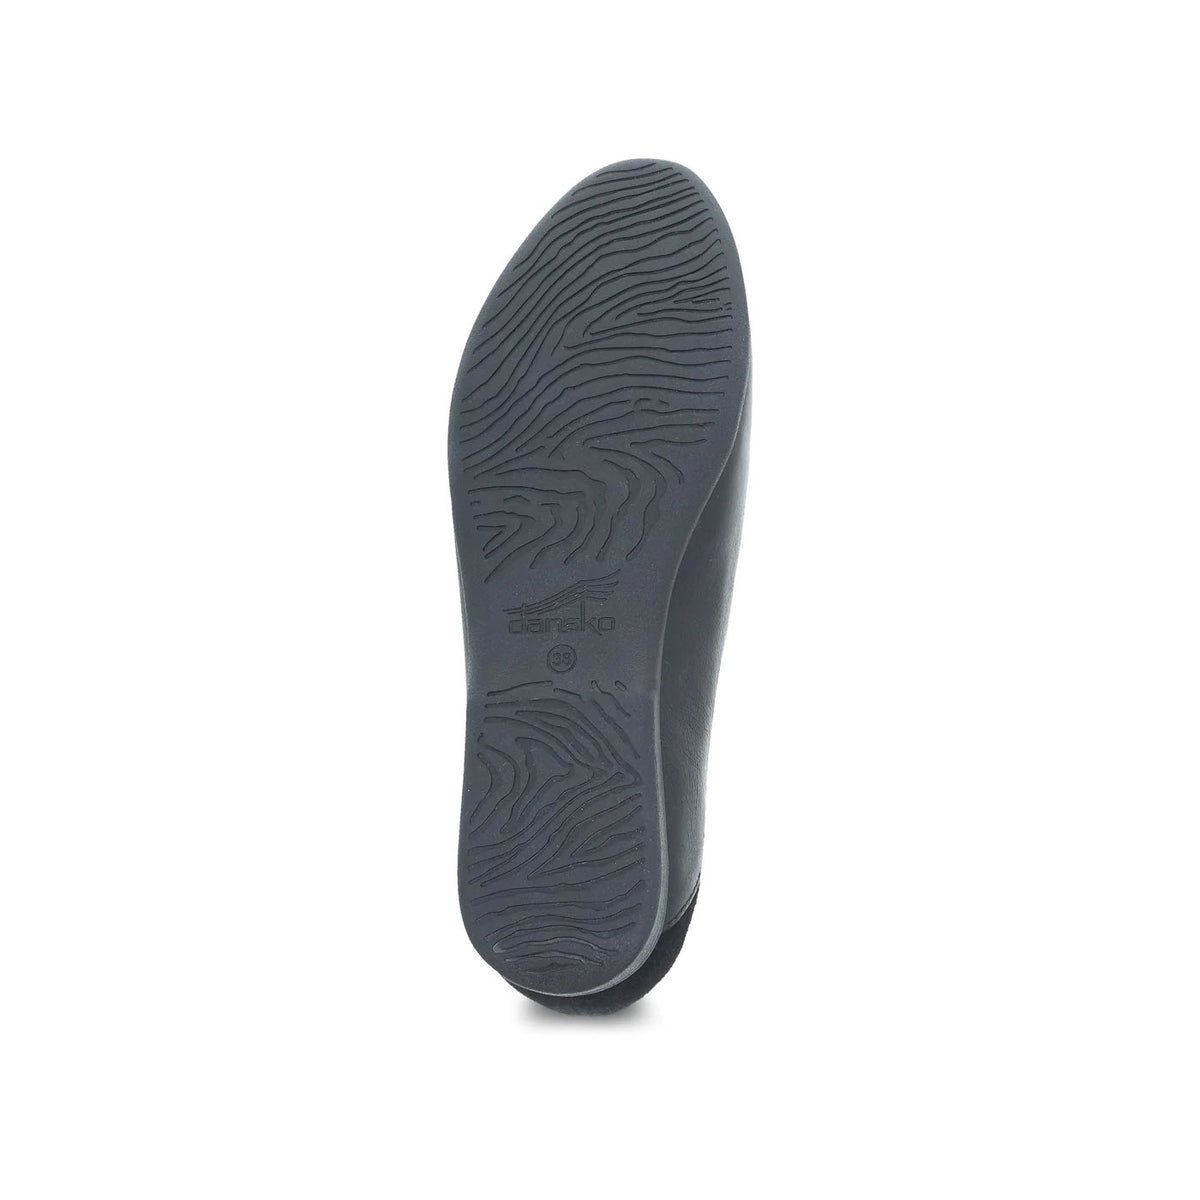 A single Dansko lace black glazed moc loafer sole displayed against a white background, with visible patterns and brand markings.